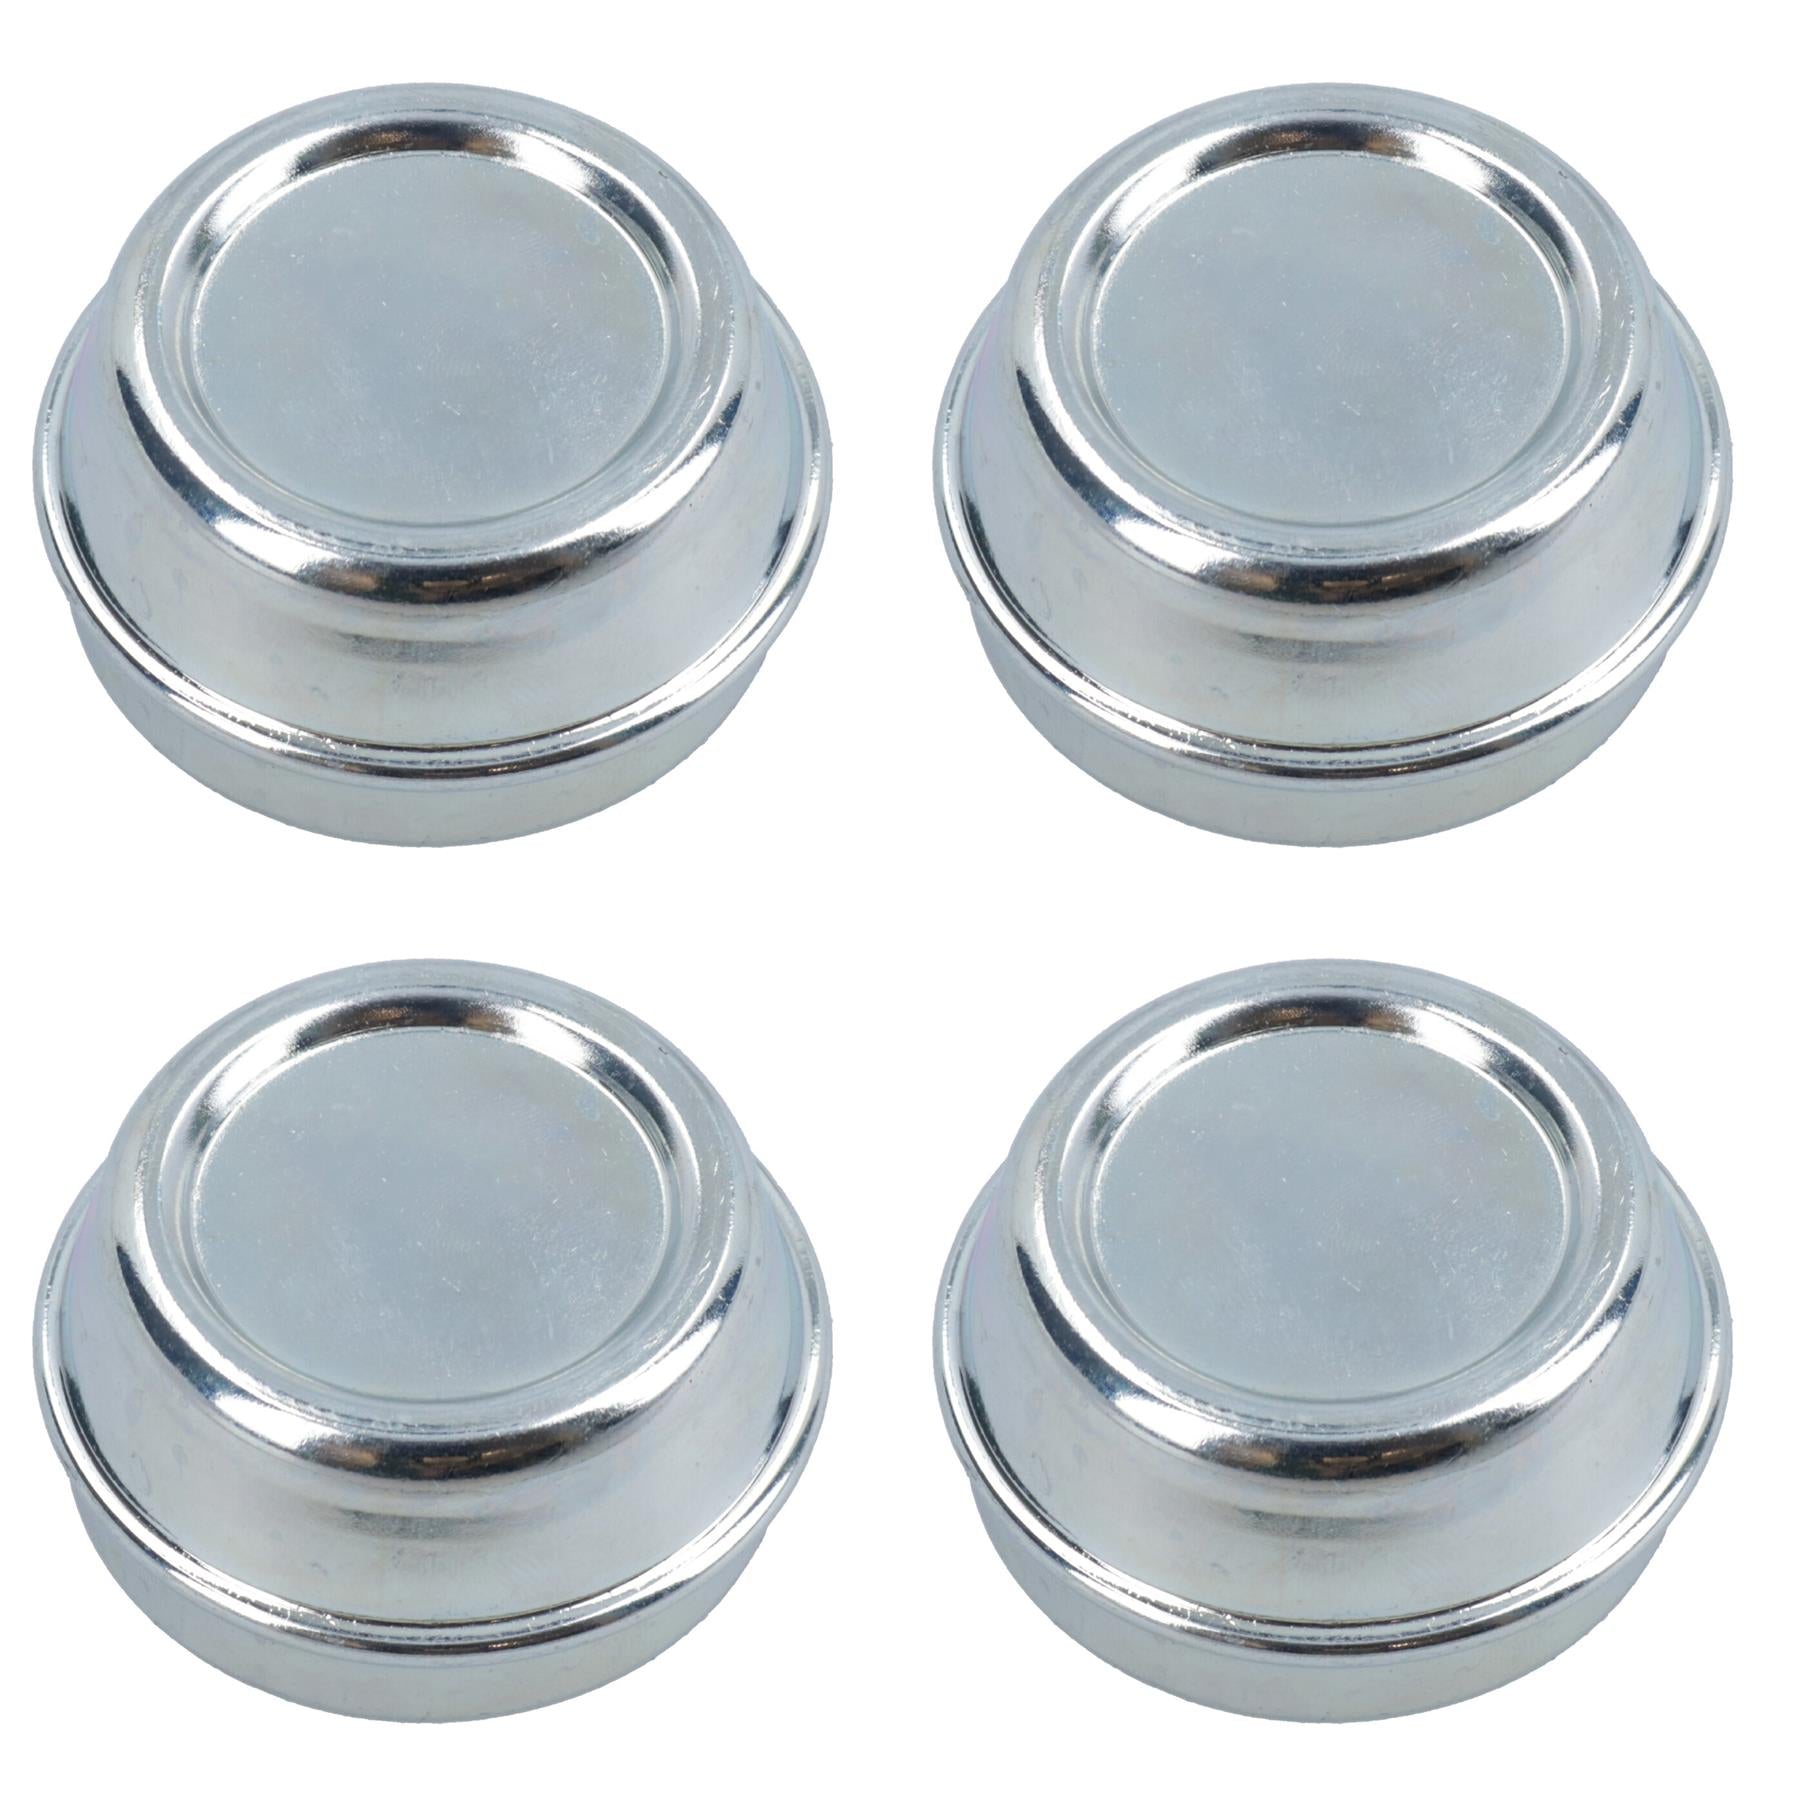 Replacement 48mm Dust Hub Cap Grease Cover for Alko Trailer Drums